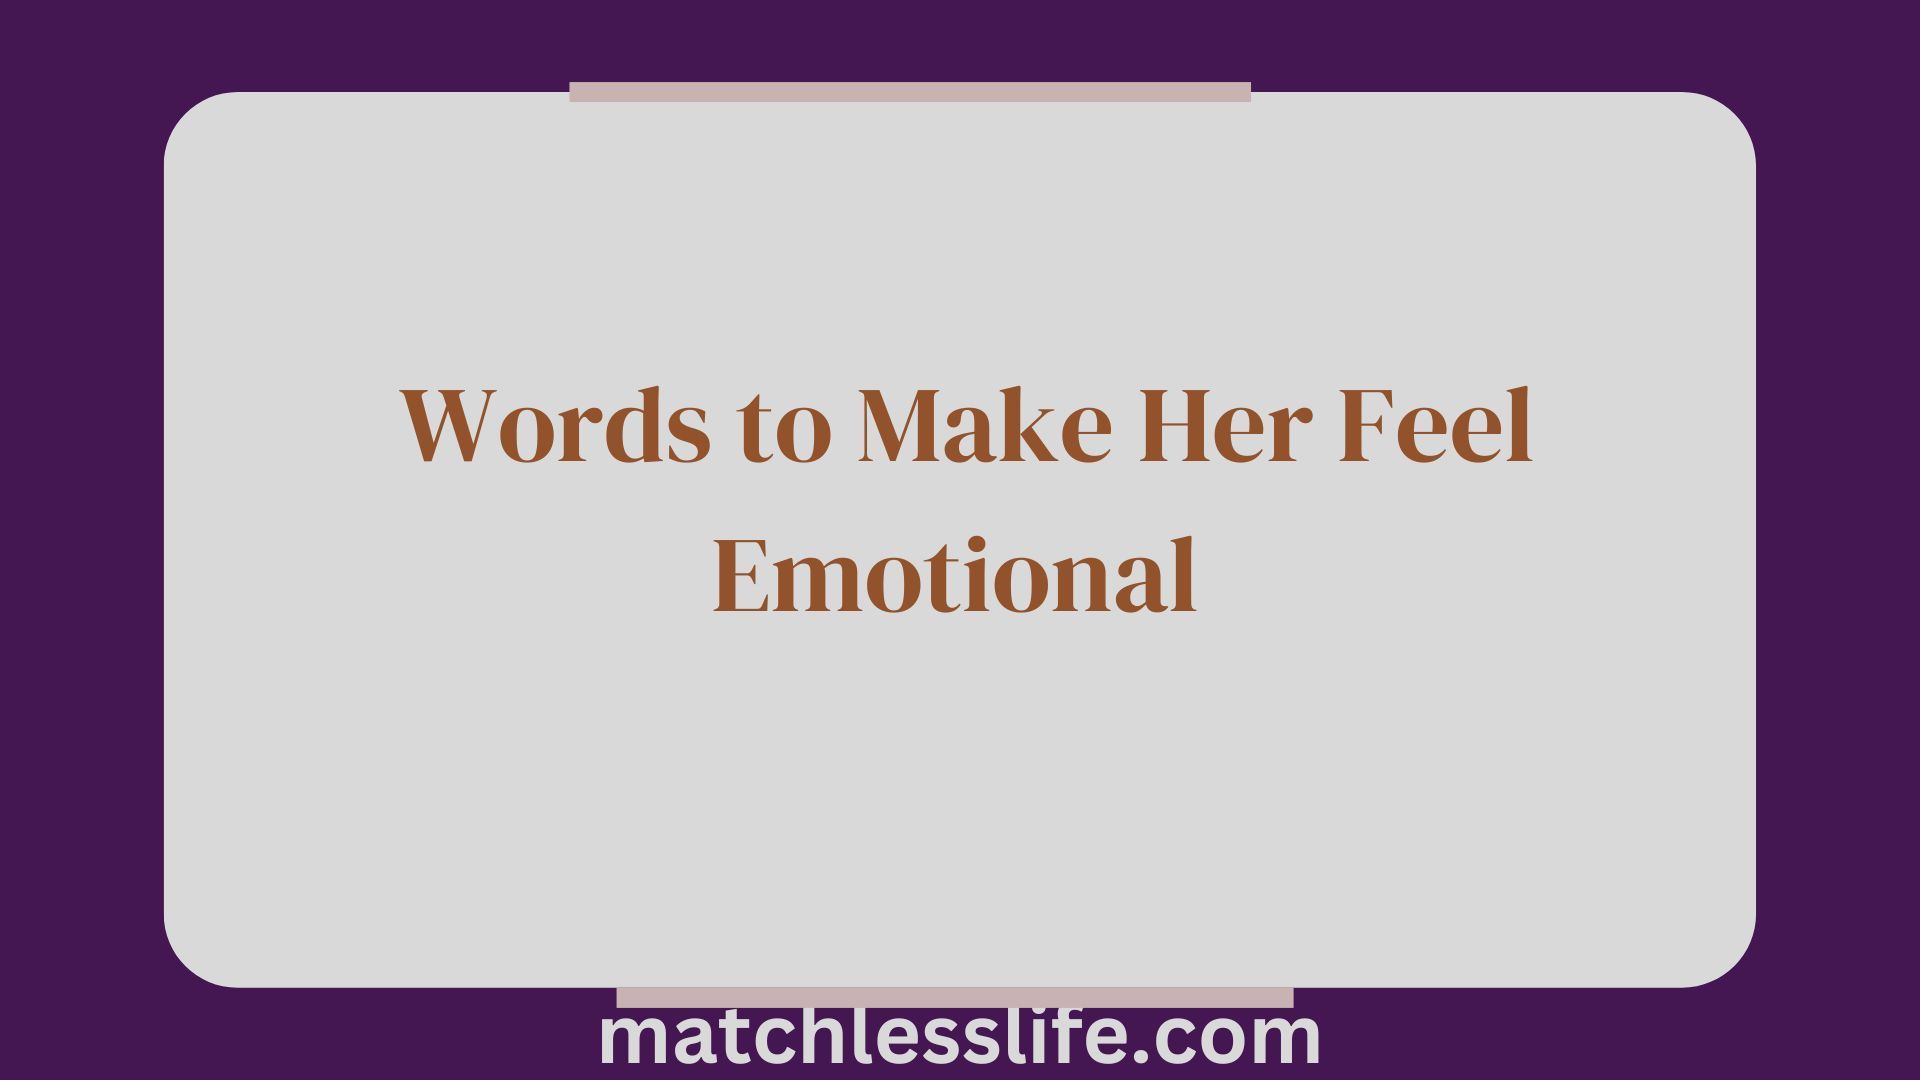 Words to Make Her Feel Emotional